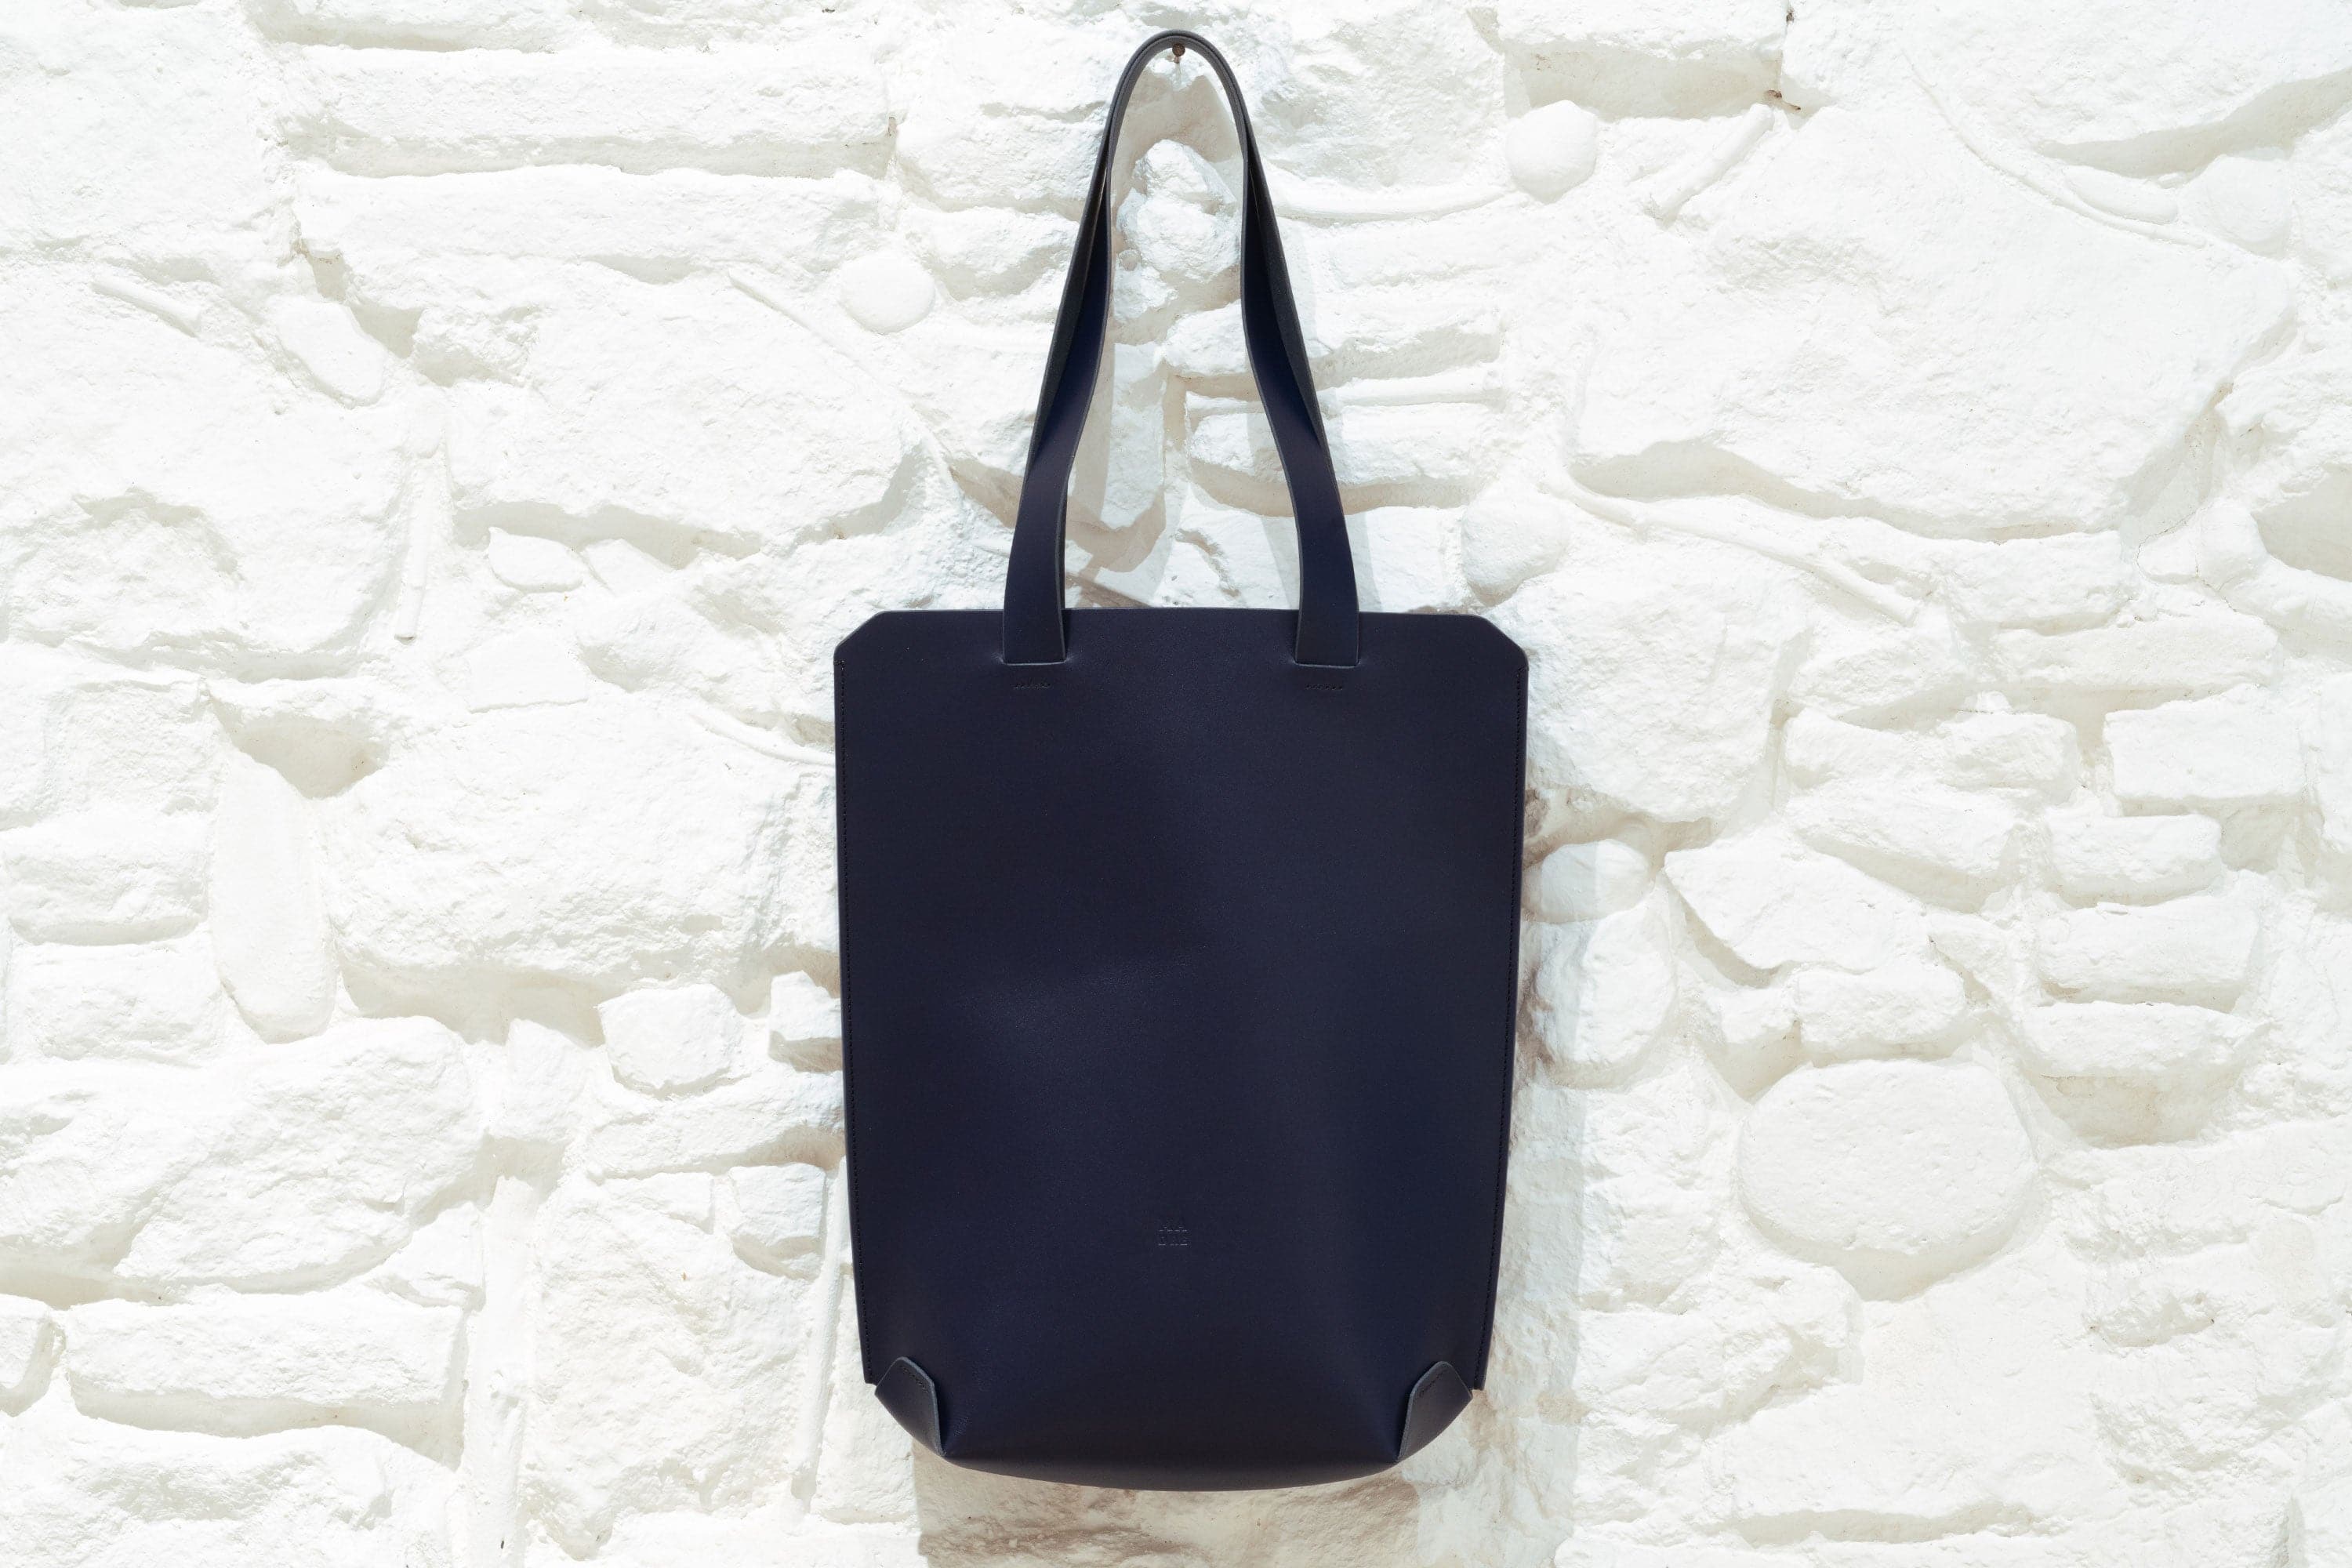 Tote Bag High Size Vertical Marine Blue Color Vegetable Tanned Leather Handcrafted Design By Manuel Dreesmann Atelier Madre Barcelona Spain